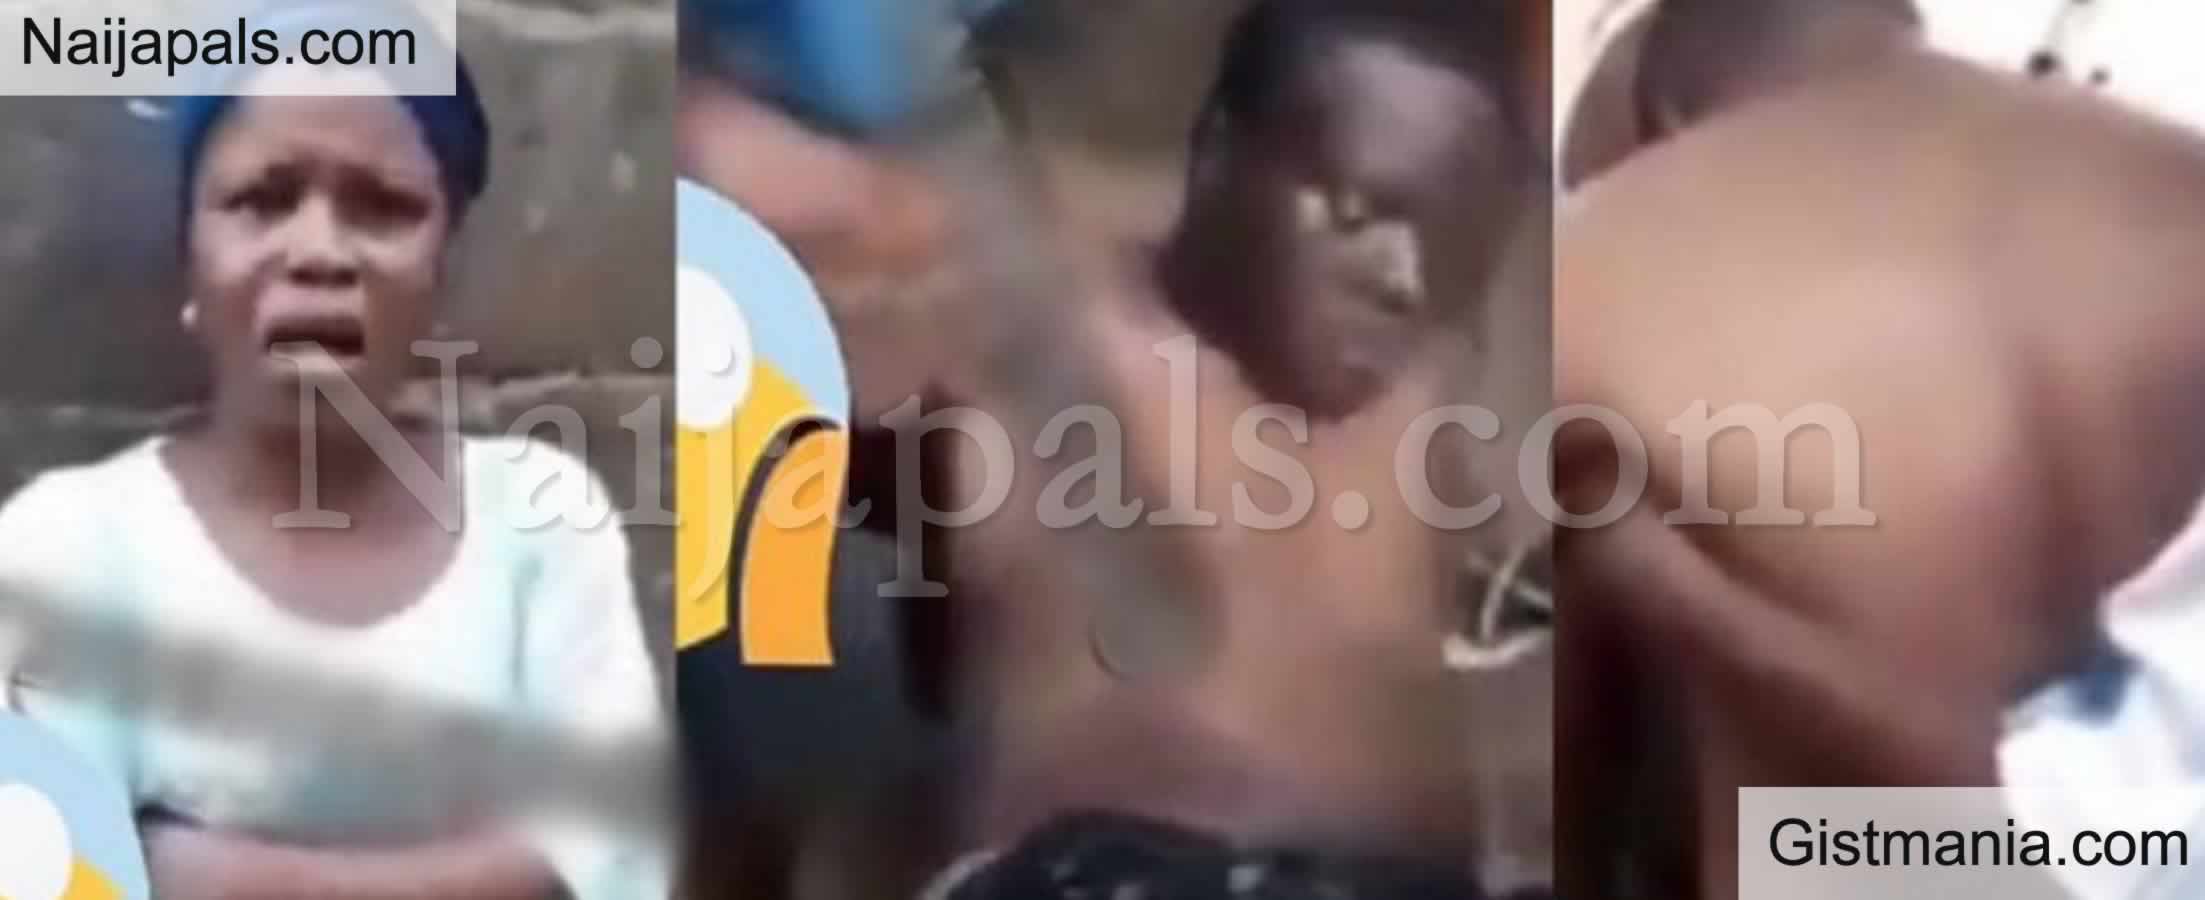 VIDEO Married Woman Lands In Trouble As Her Married Lover Collapses After S3x Romp pic